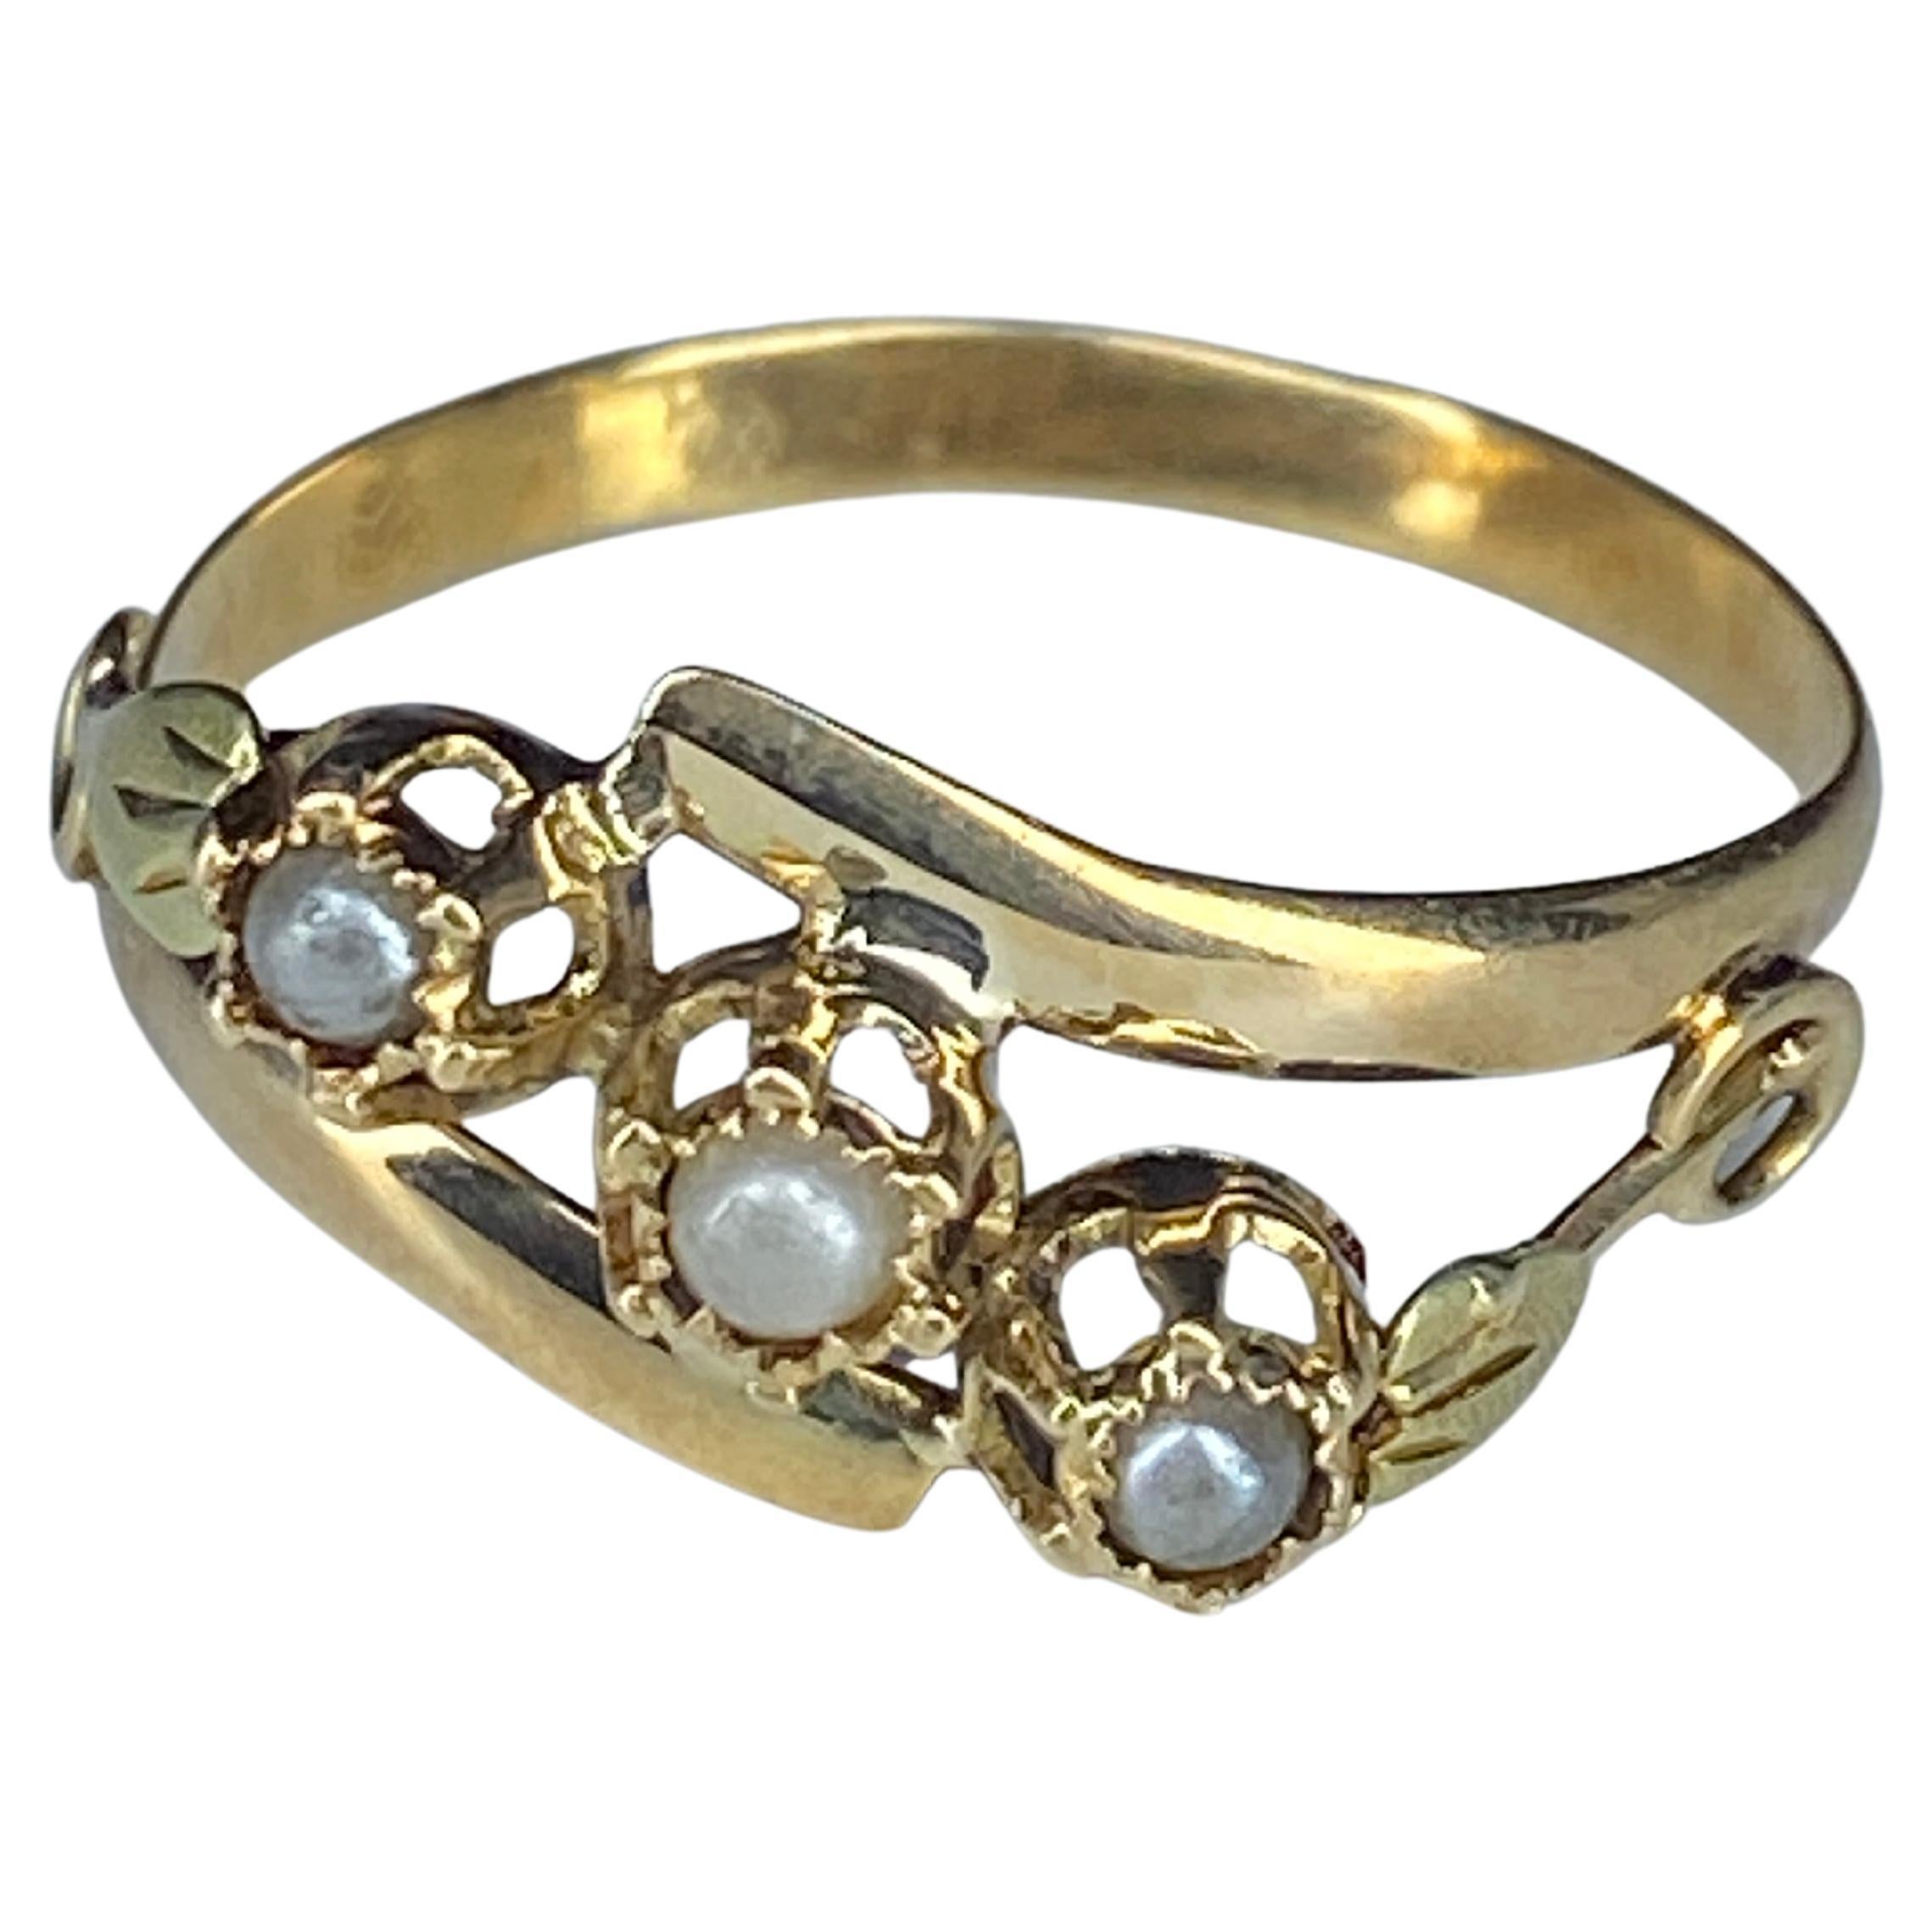 18 Carat Gold Ring Set with 3 Fines Pearls, circa 1900